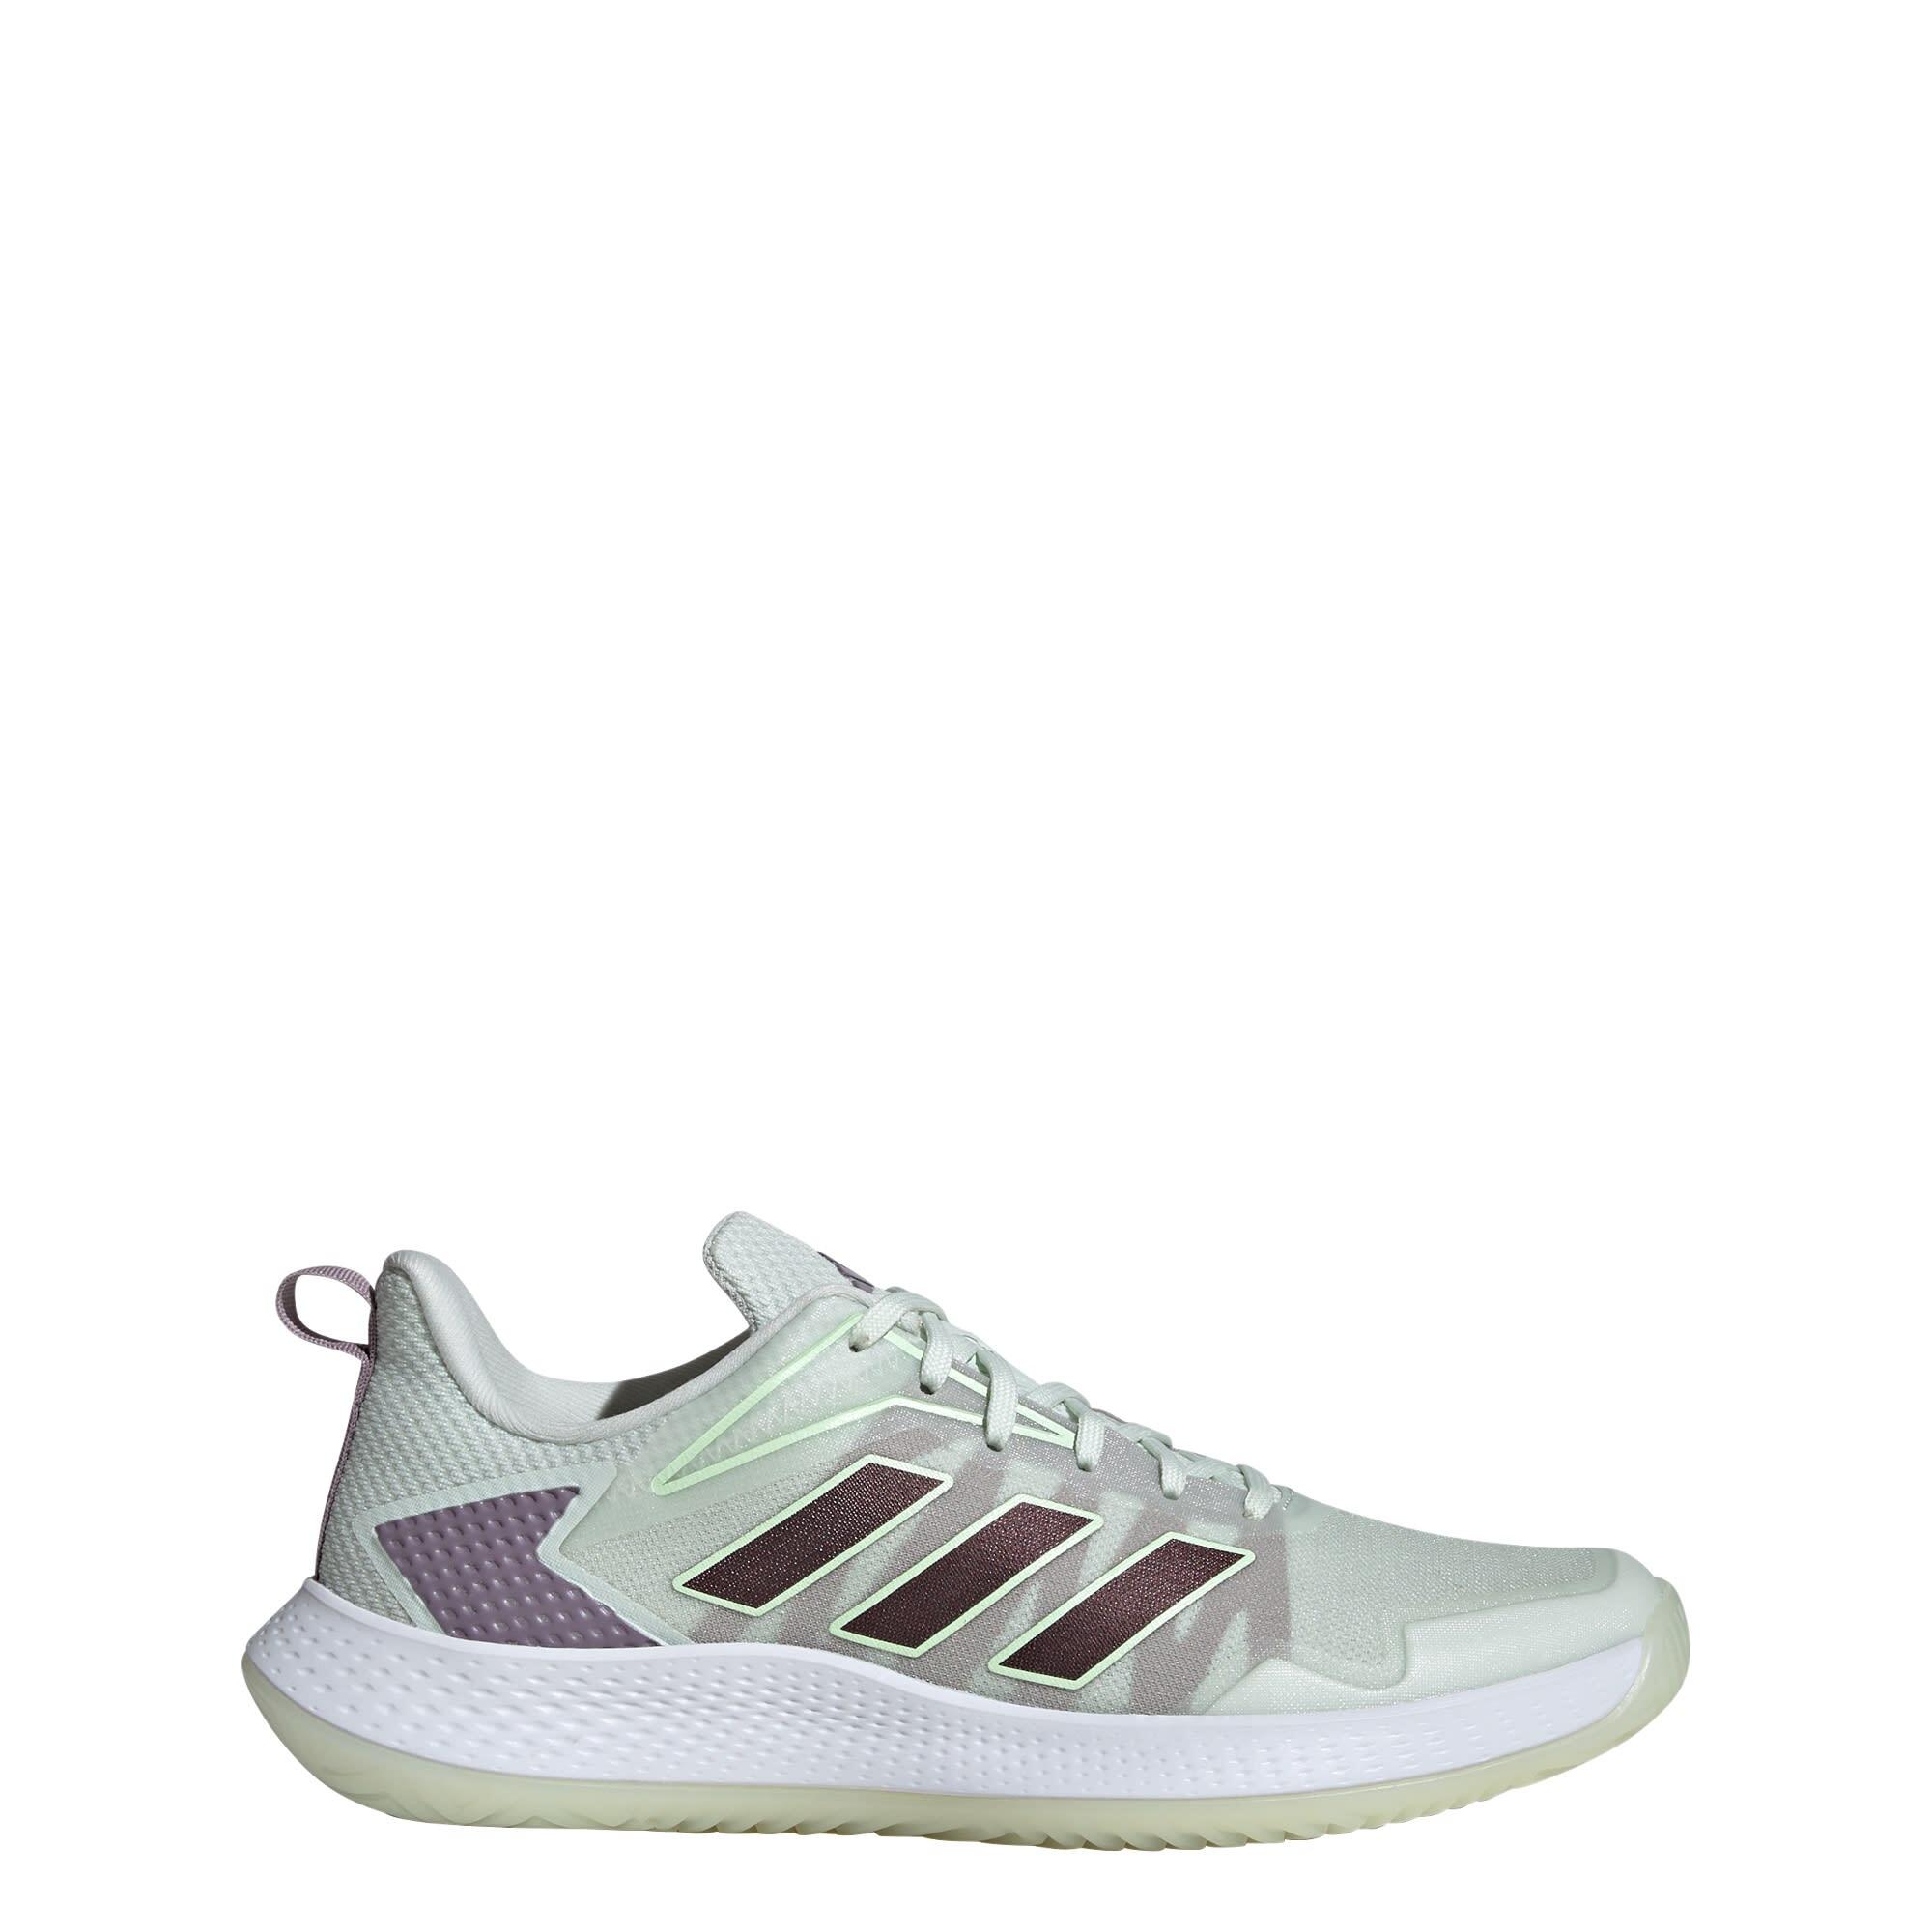 ADIDAS Defiant Speed Tennis Shoes